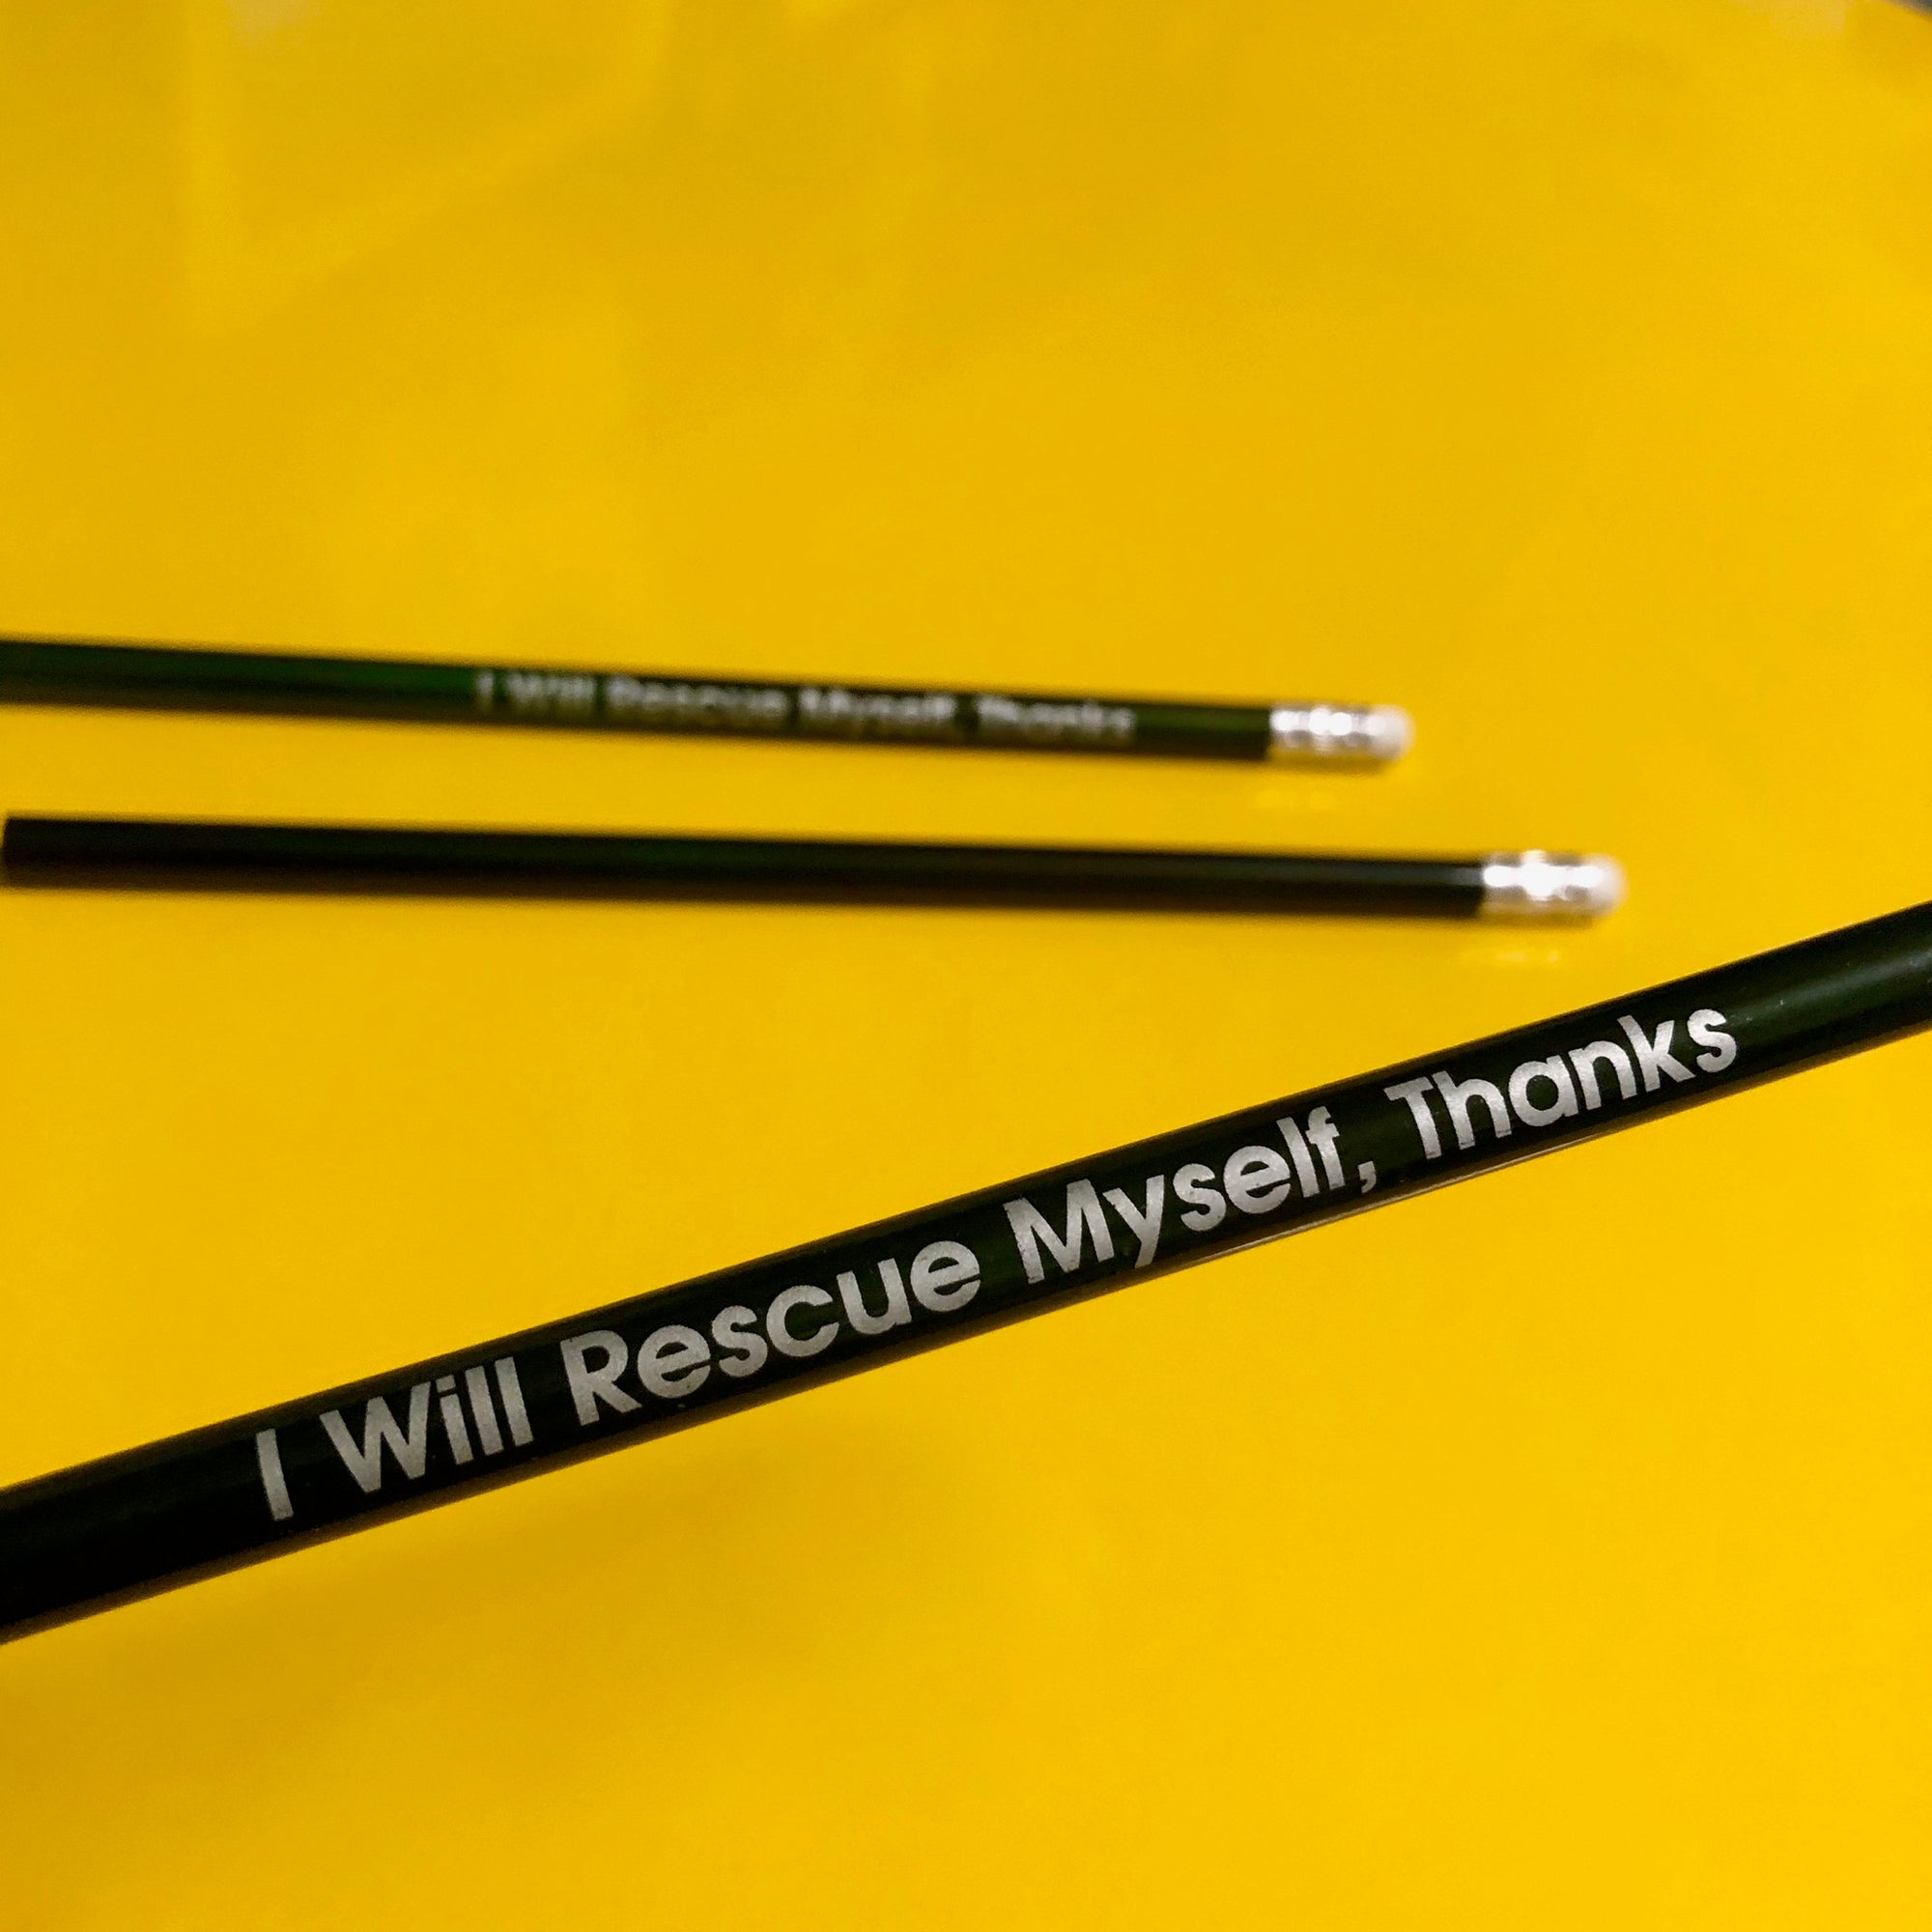 Pencil Three Pack - I Will Rescue Myself, Thanks